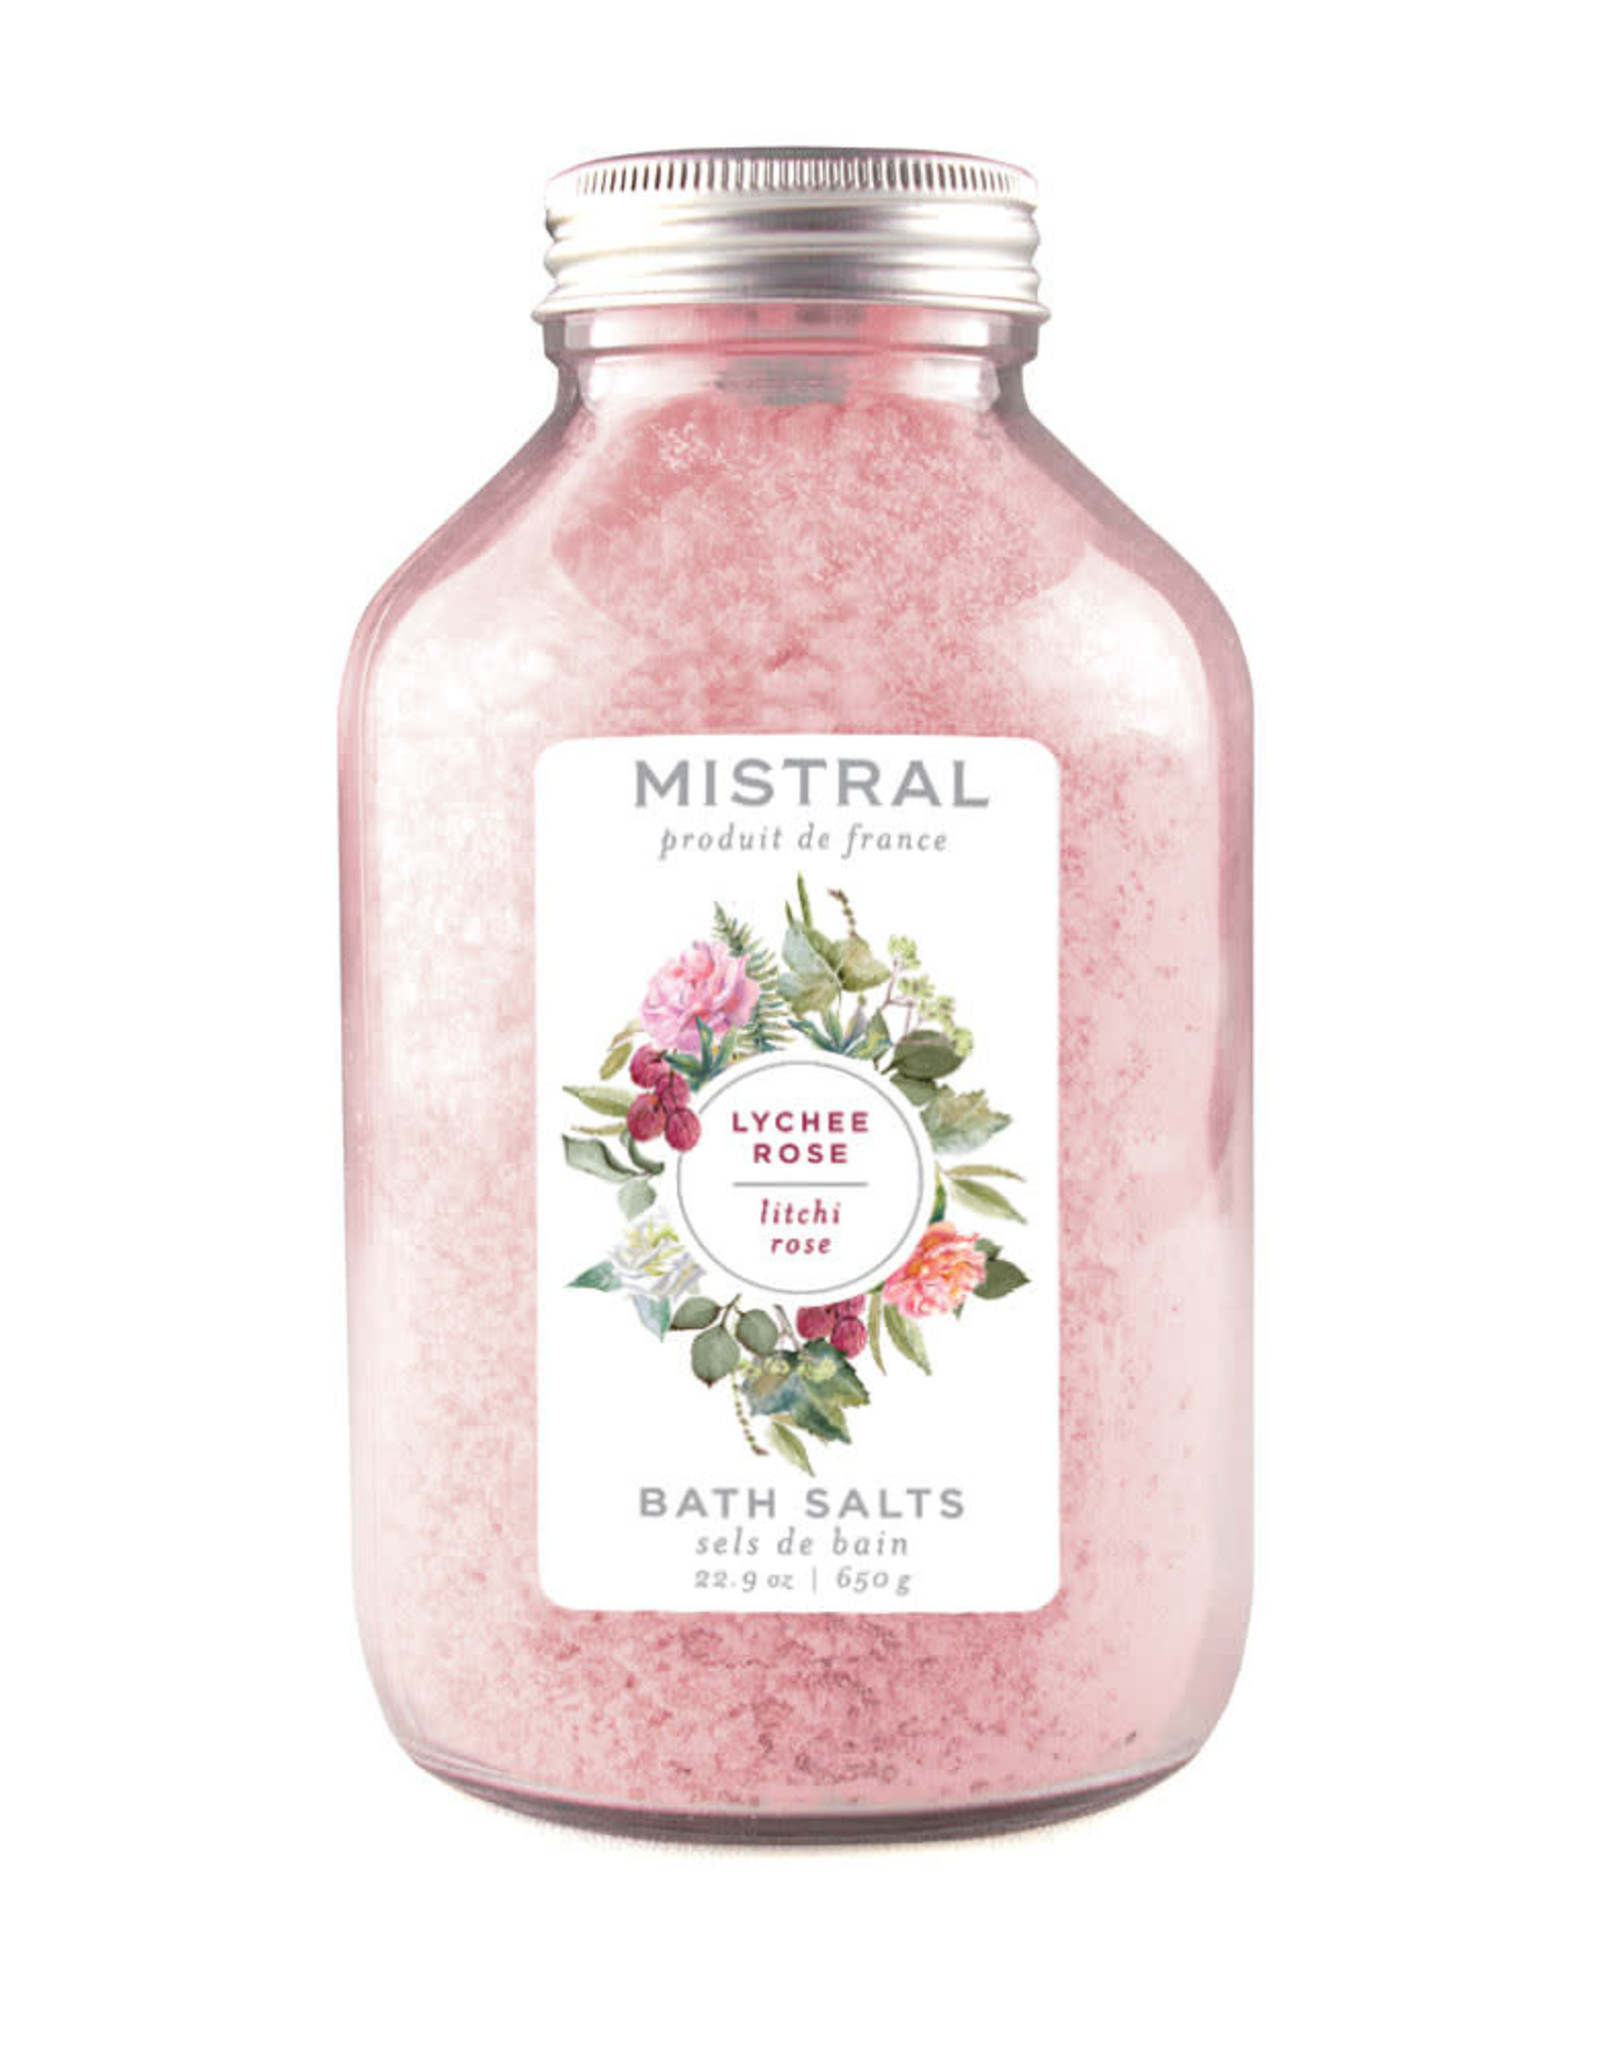 Lychee Rose Bath Salts - 22.9 oz Glass Bottle - Mistral Classic Collection